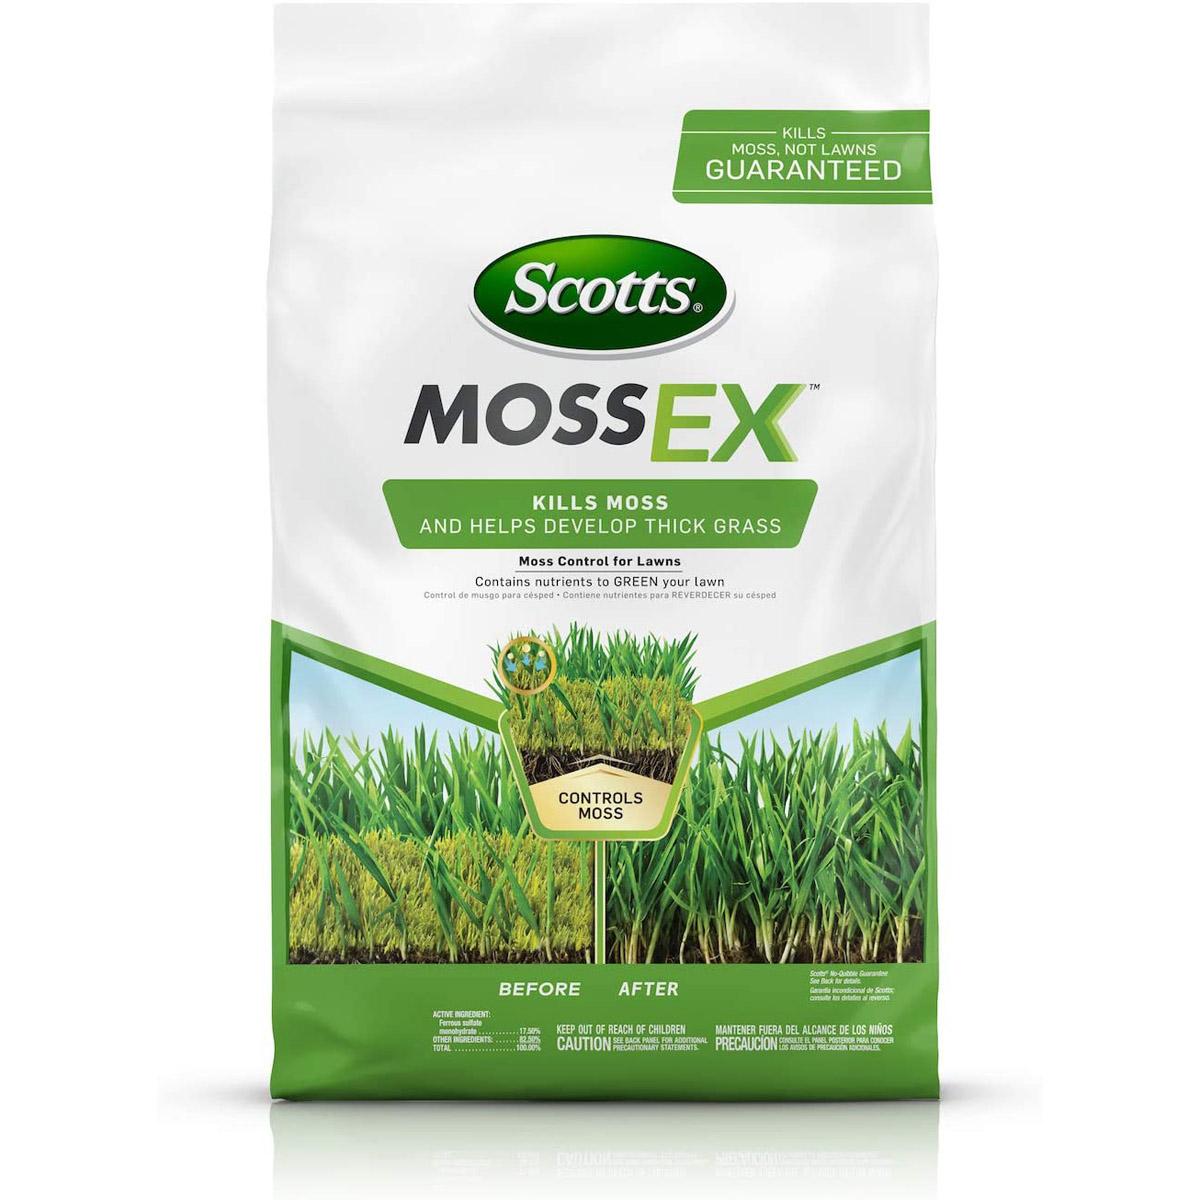 Scotts MossEx Moss Control for Lawns for $7.17